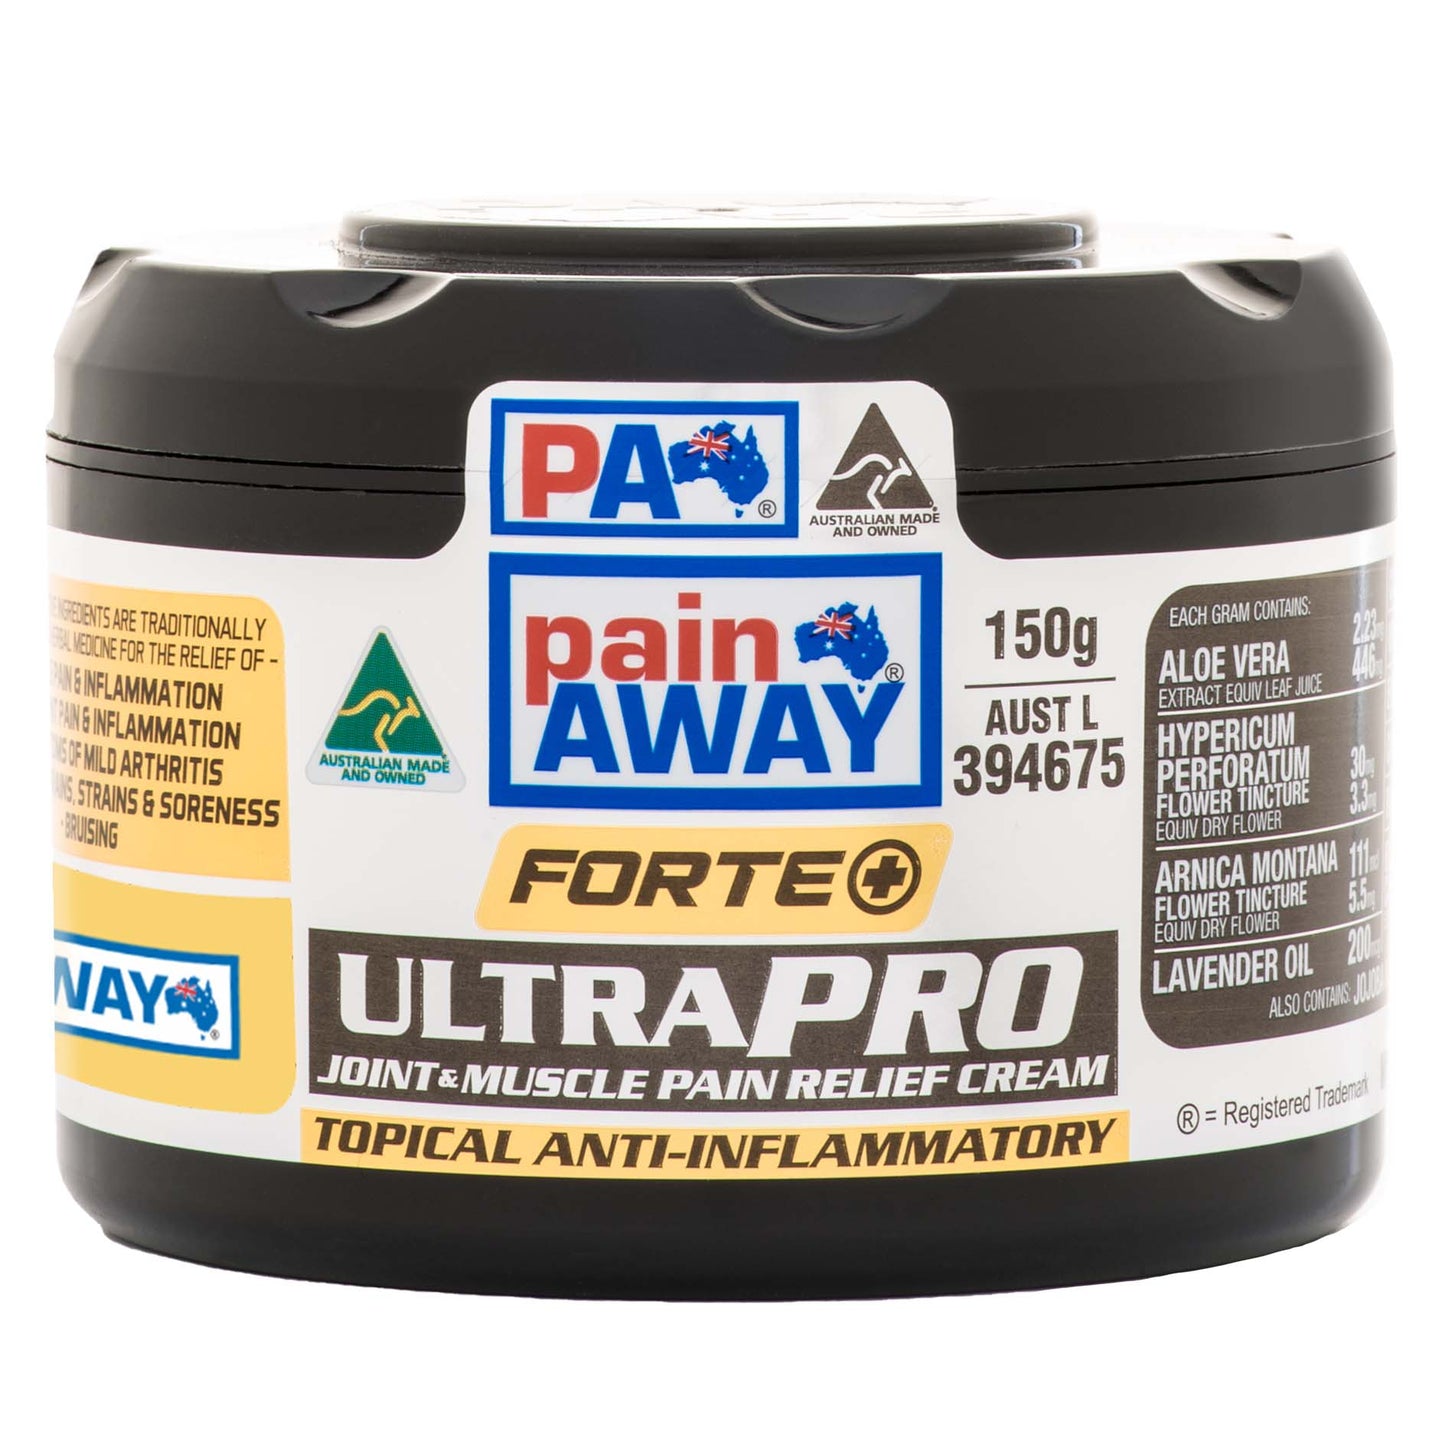 PAIN AWAY FORTE+ ULTRA PRO JOINT & MUSCLE PAIN RELIEF CREAM 150G